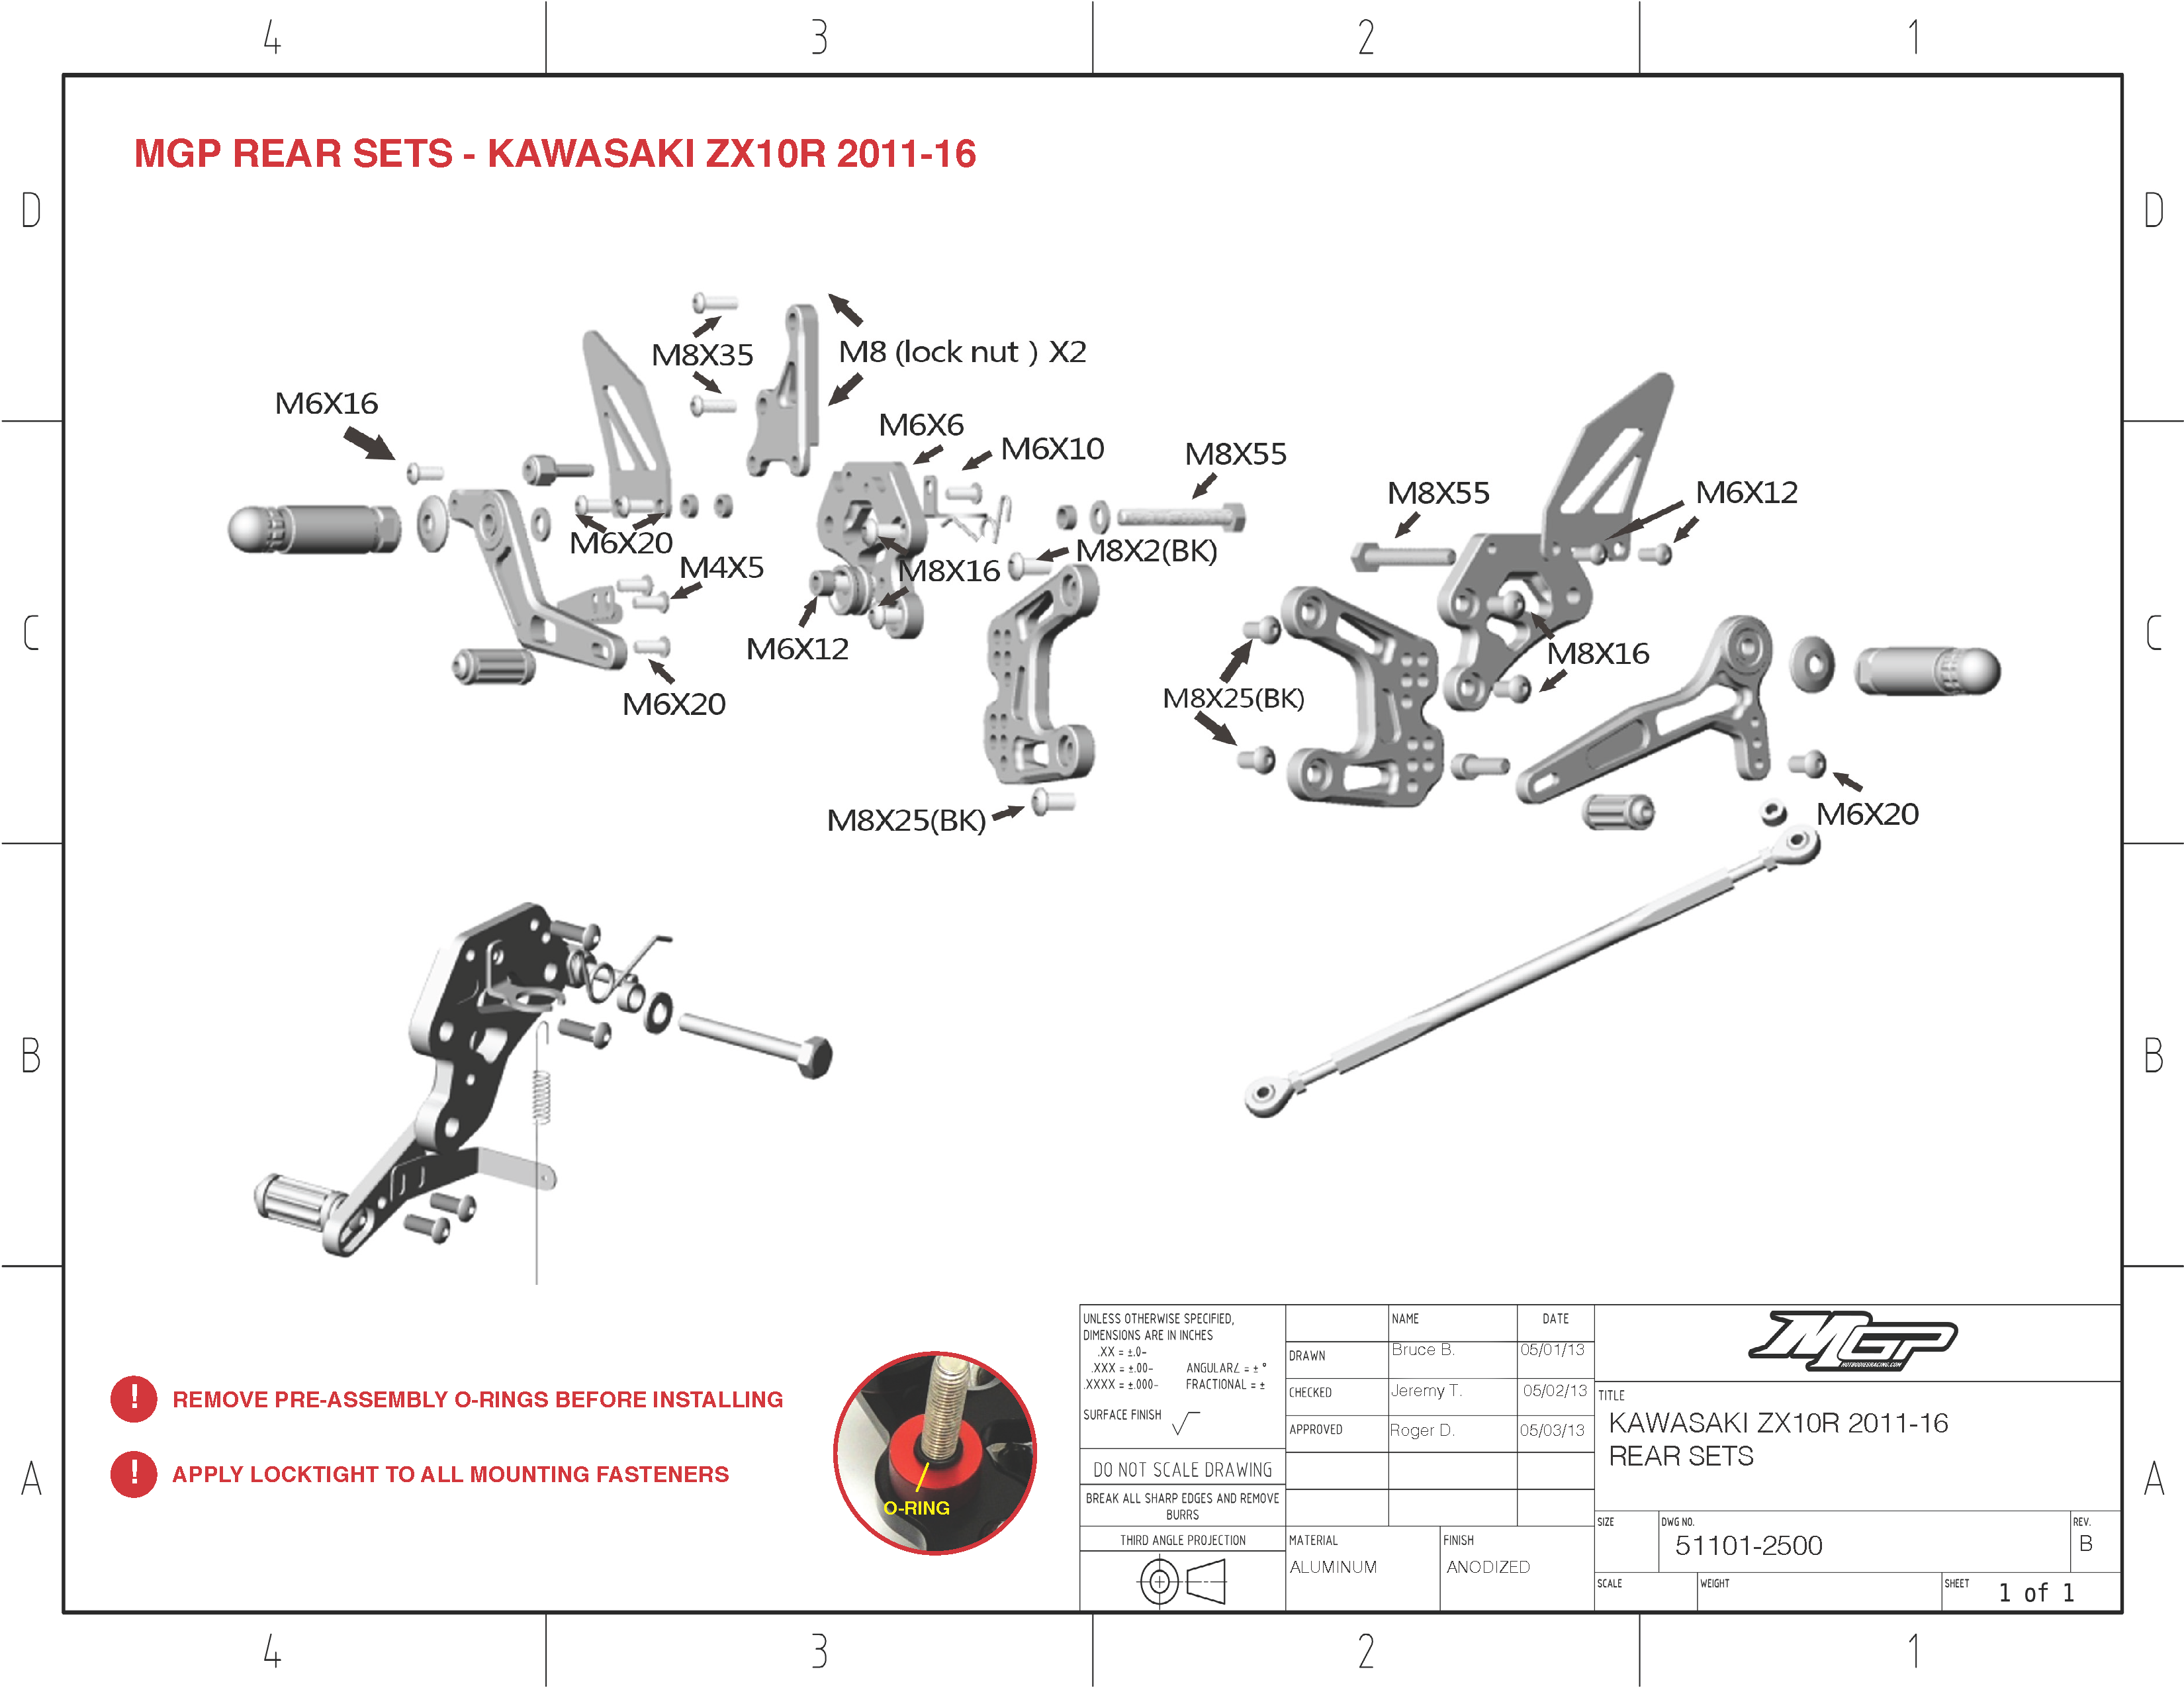 

ZX10R 2011-15 MGP Rearsets Installation

